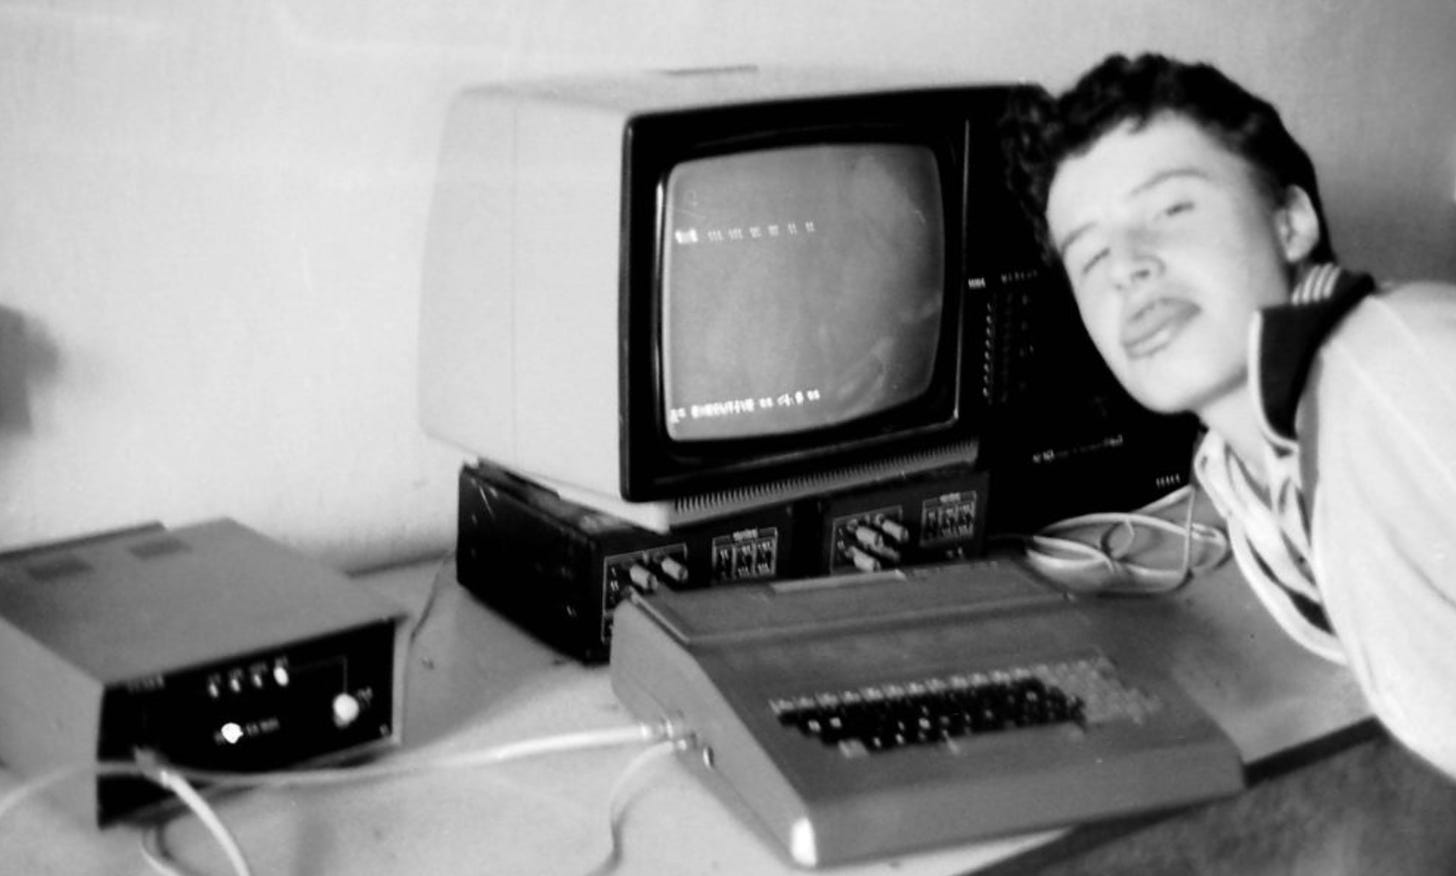 A teenager sticks his tongue out at the camera, sitting in front of a clunky 1980s computer with CRT screen.